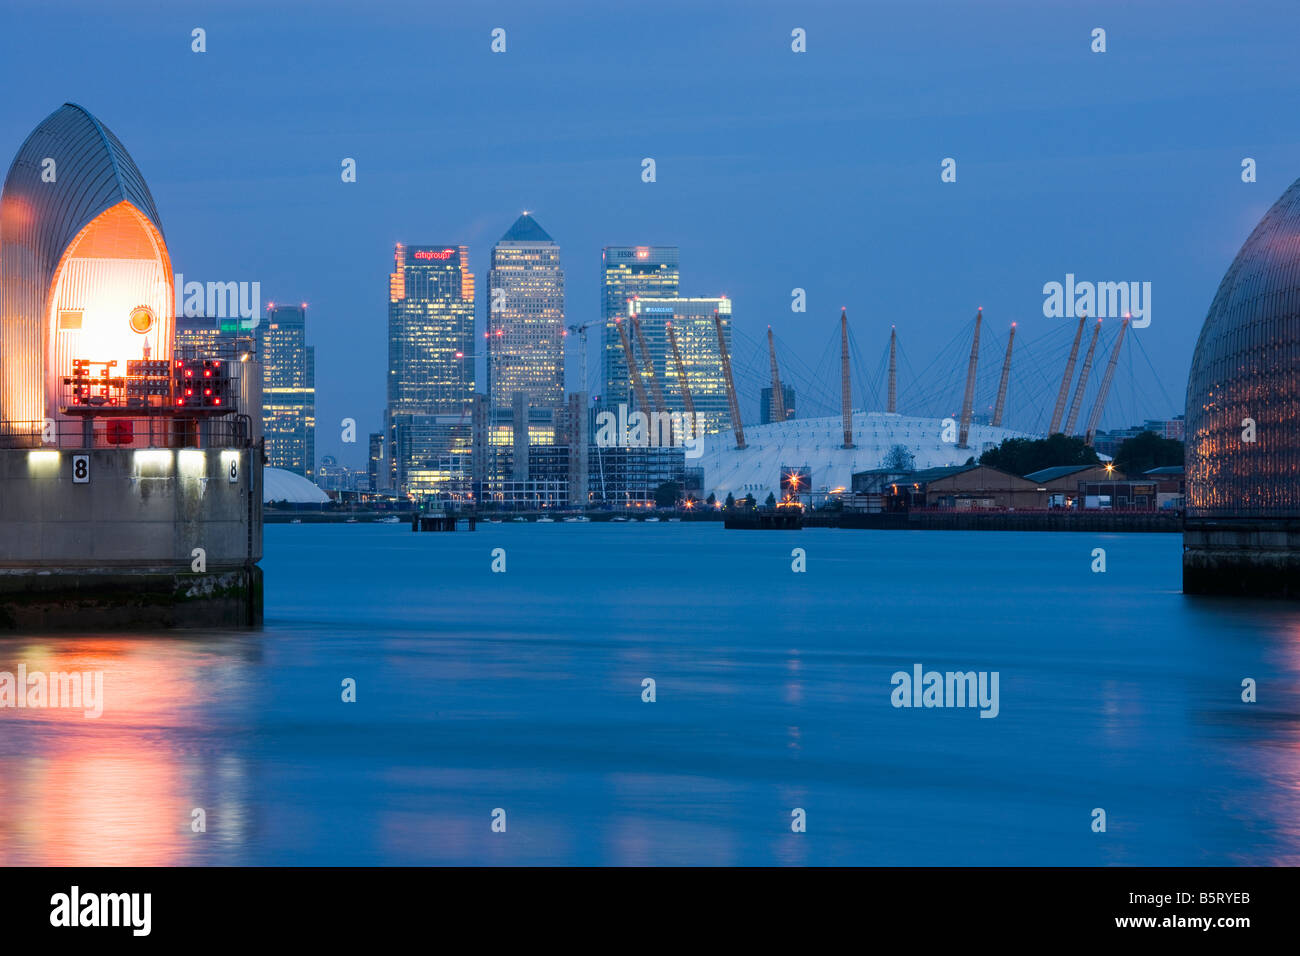 UK London Canary wharf viewed from the Thames Barrier Stock Photo